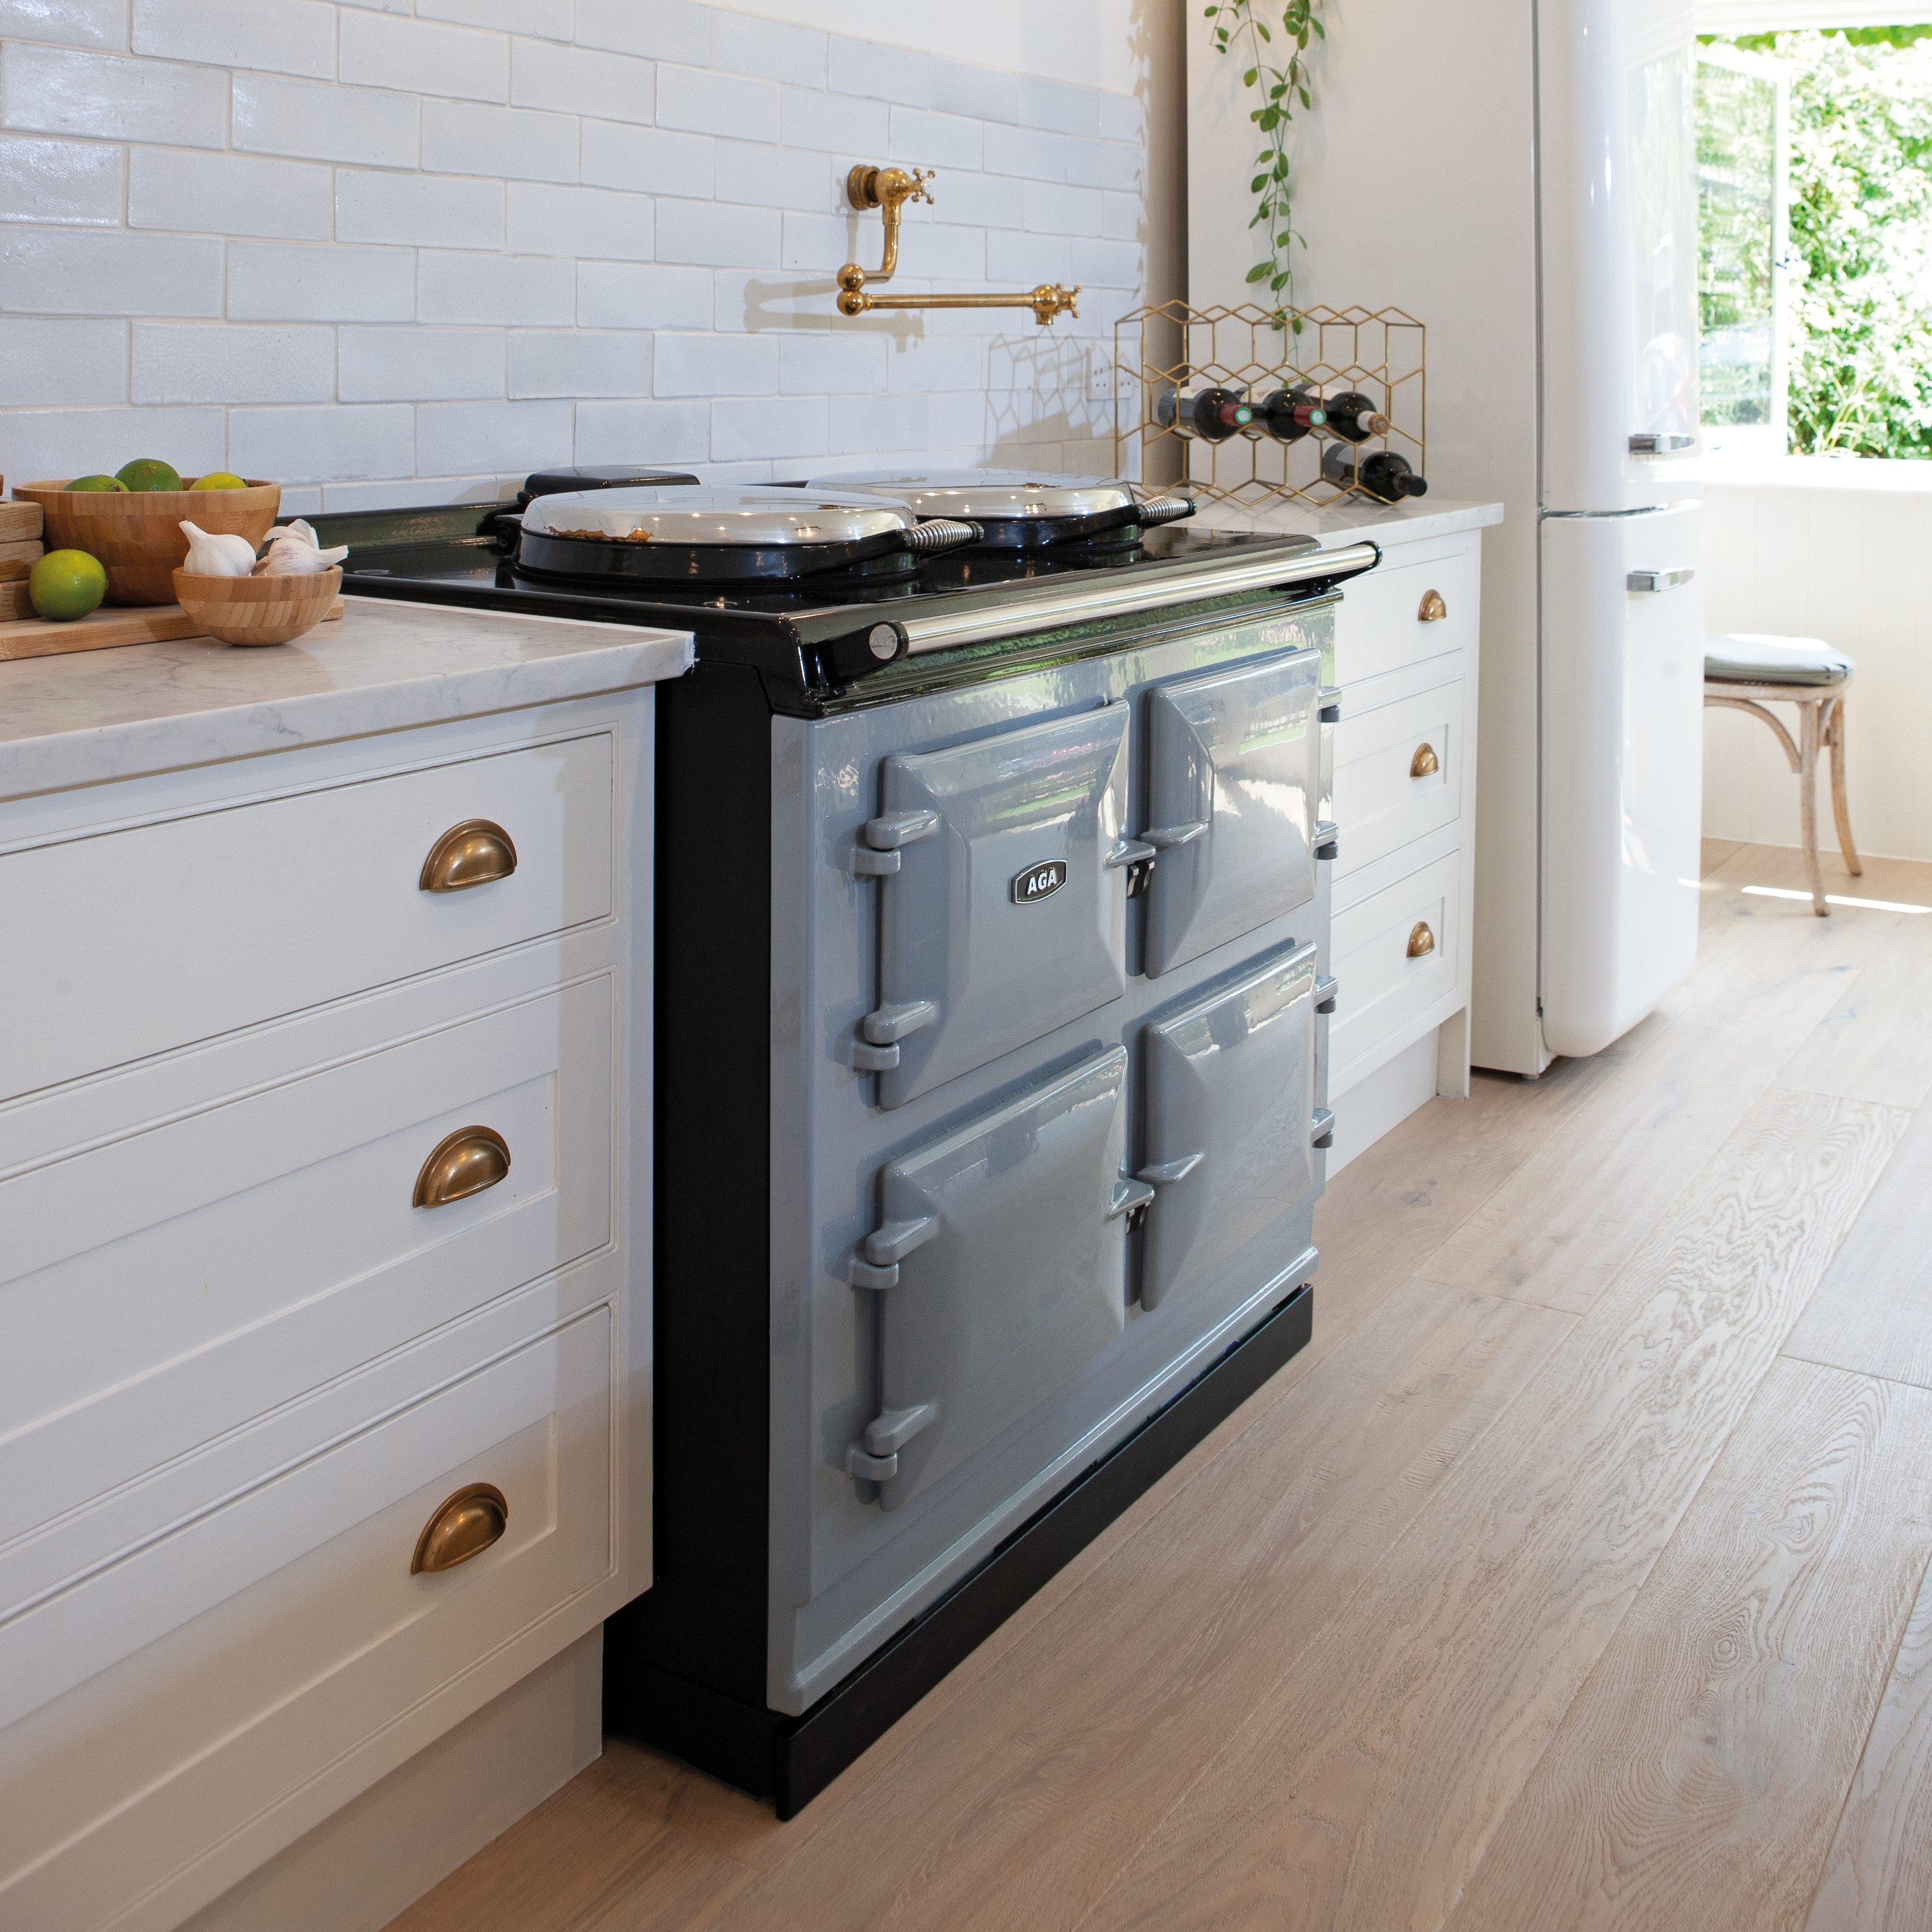 Current AGA & Rayburn Promotions